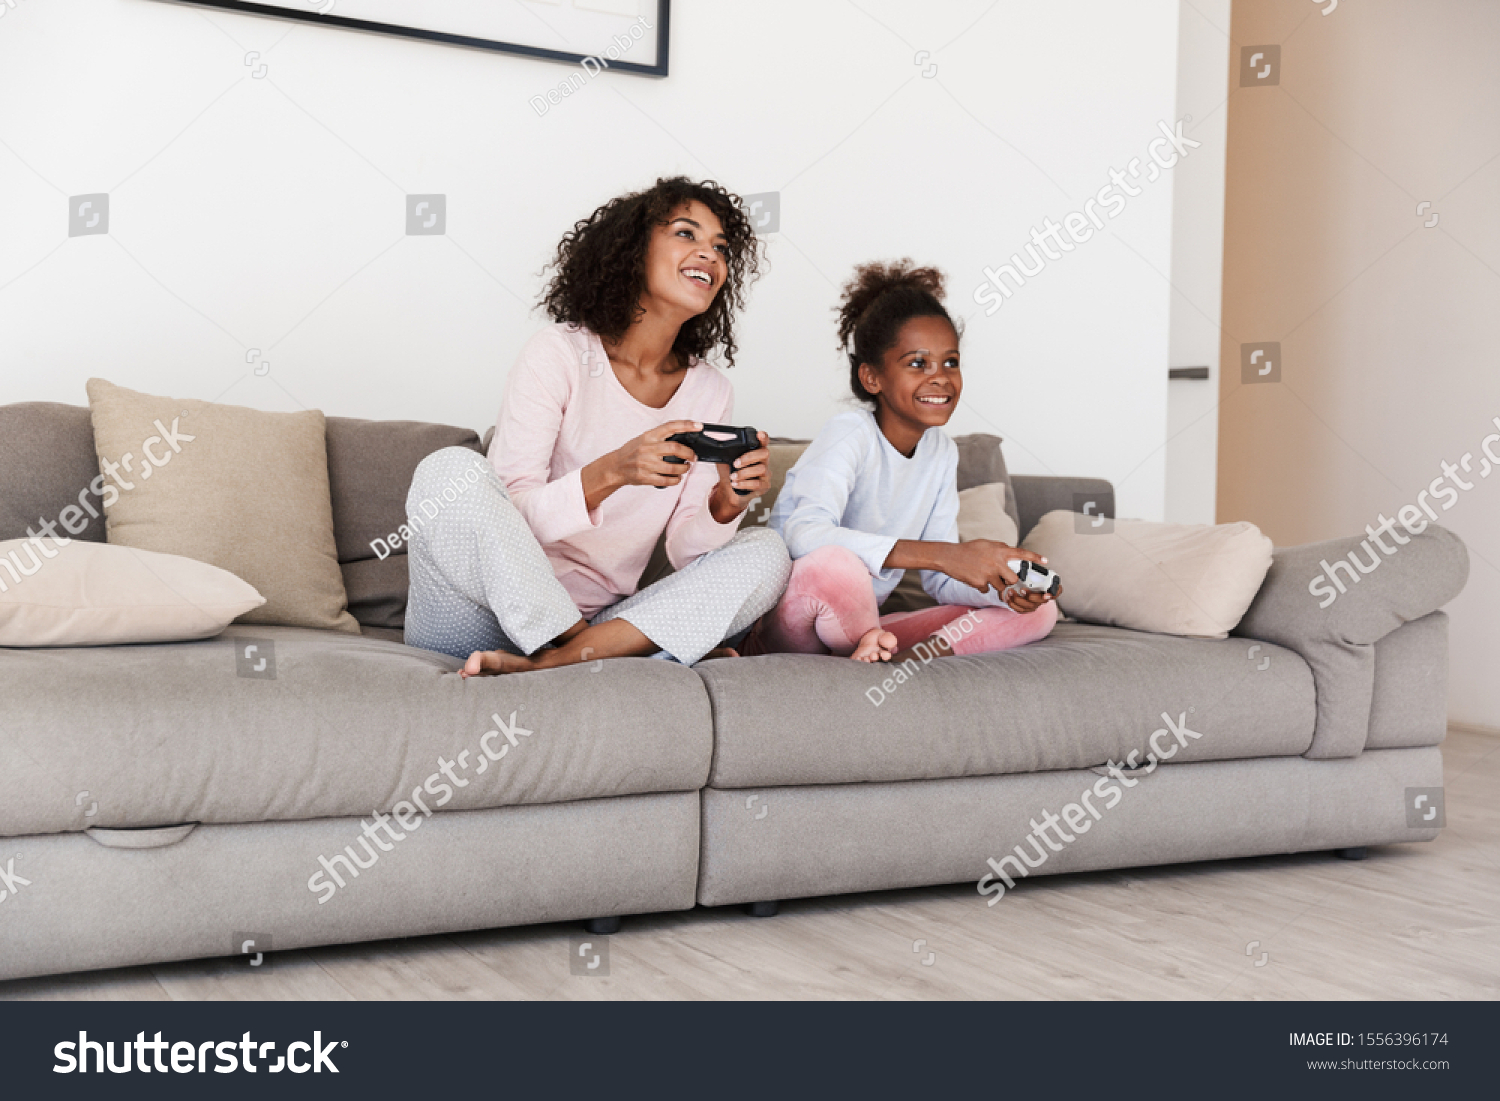 Smiling young mother and her little daughter wearing pajamas releaxing on a couch, playing video games #1556396174